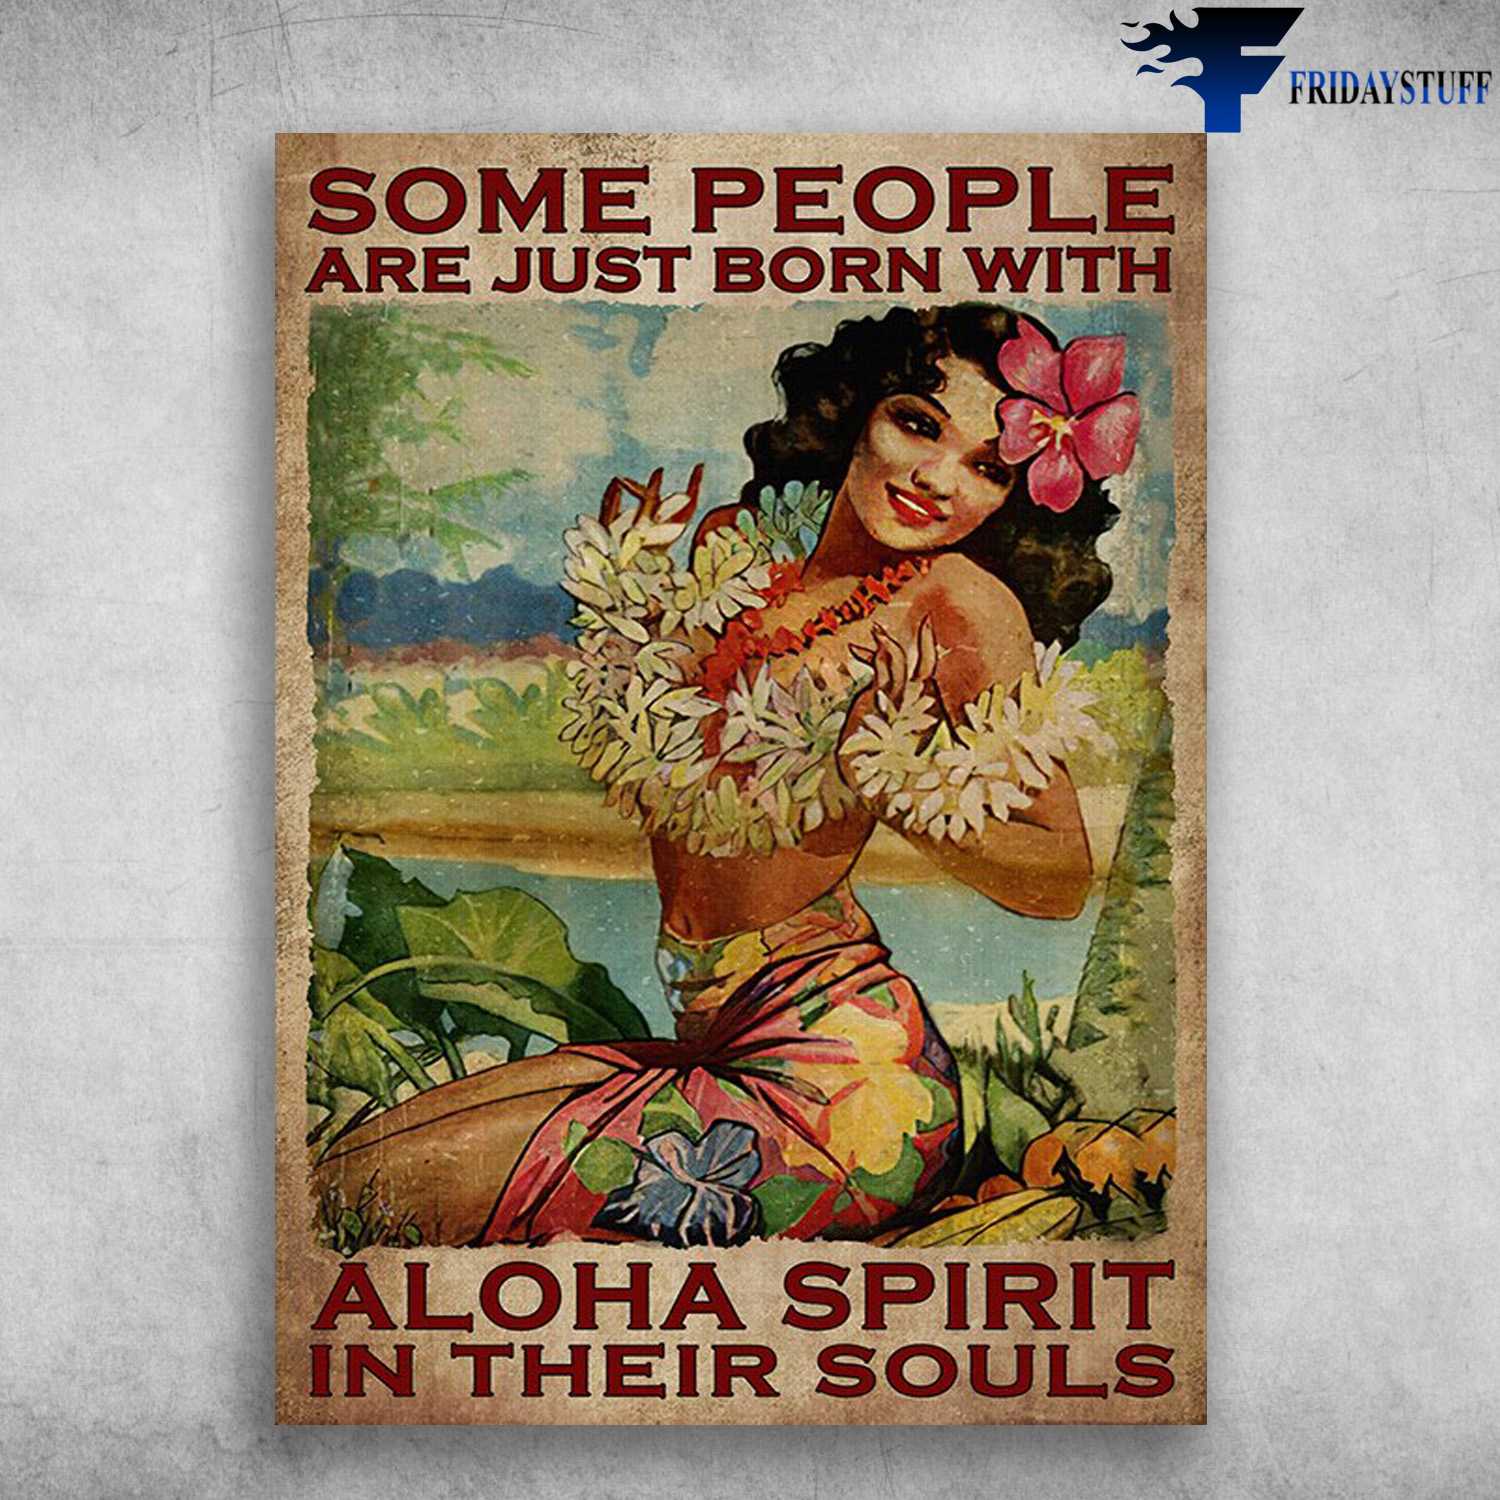 Hawaii Girl, Aloha Spirit - Some People Are Just Born With, Aloha Spirit In Their Souls